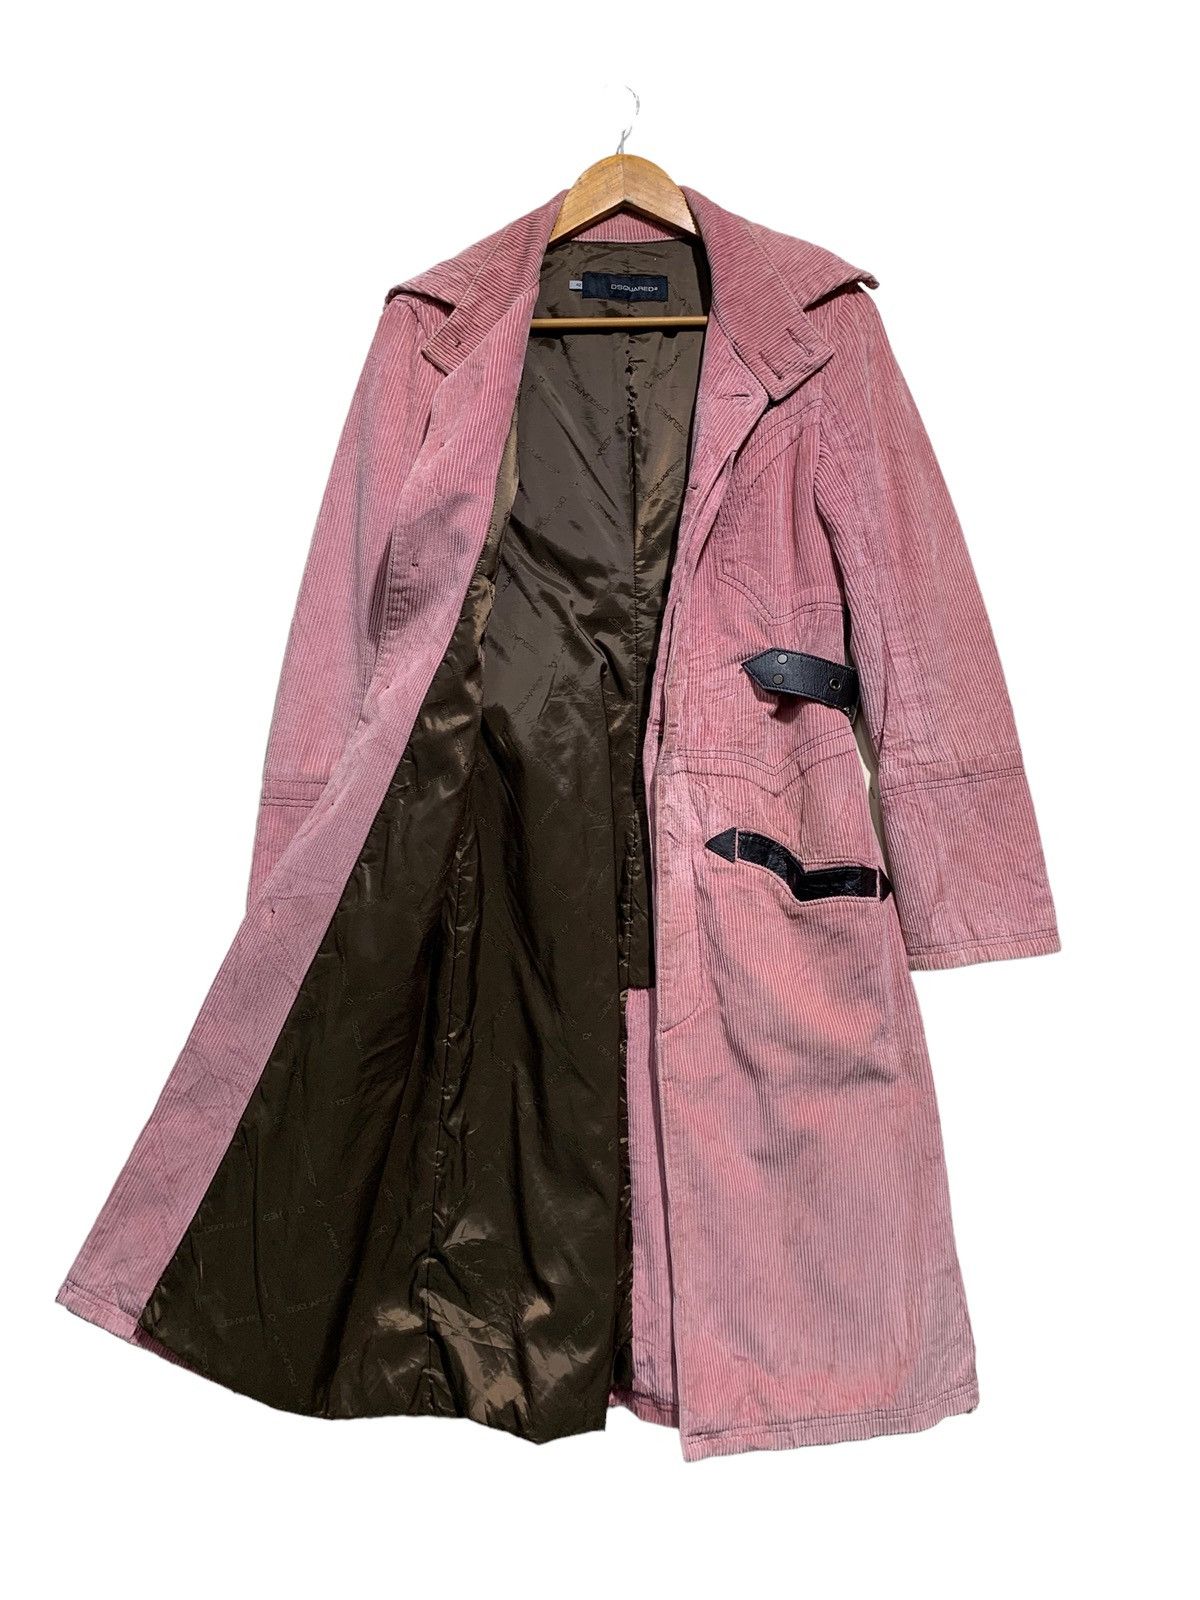 🔥DSQUARED2 CORDUROY TRENCH COATS - 4